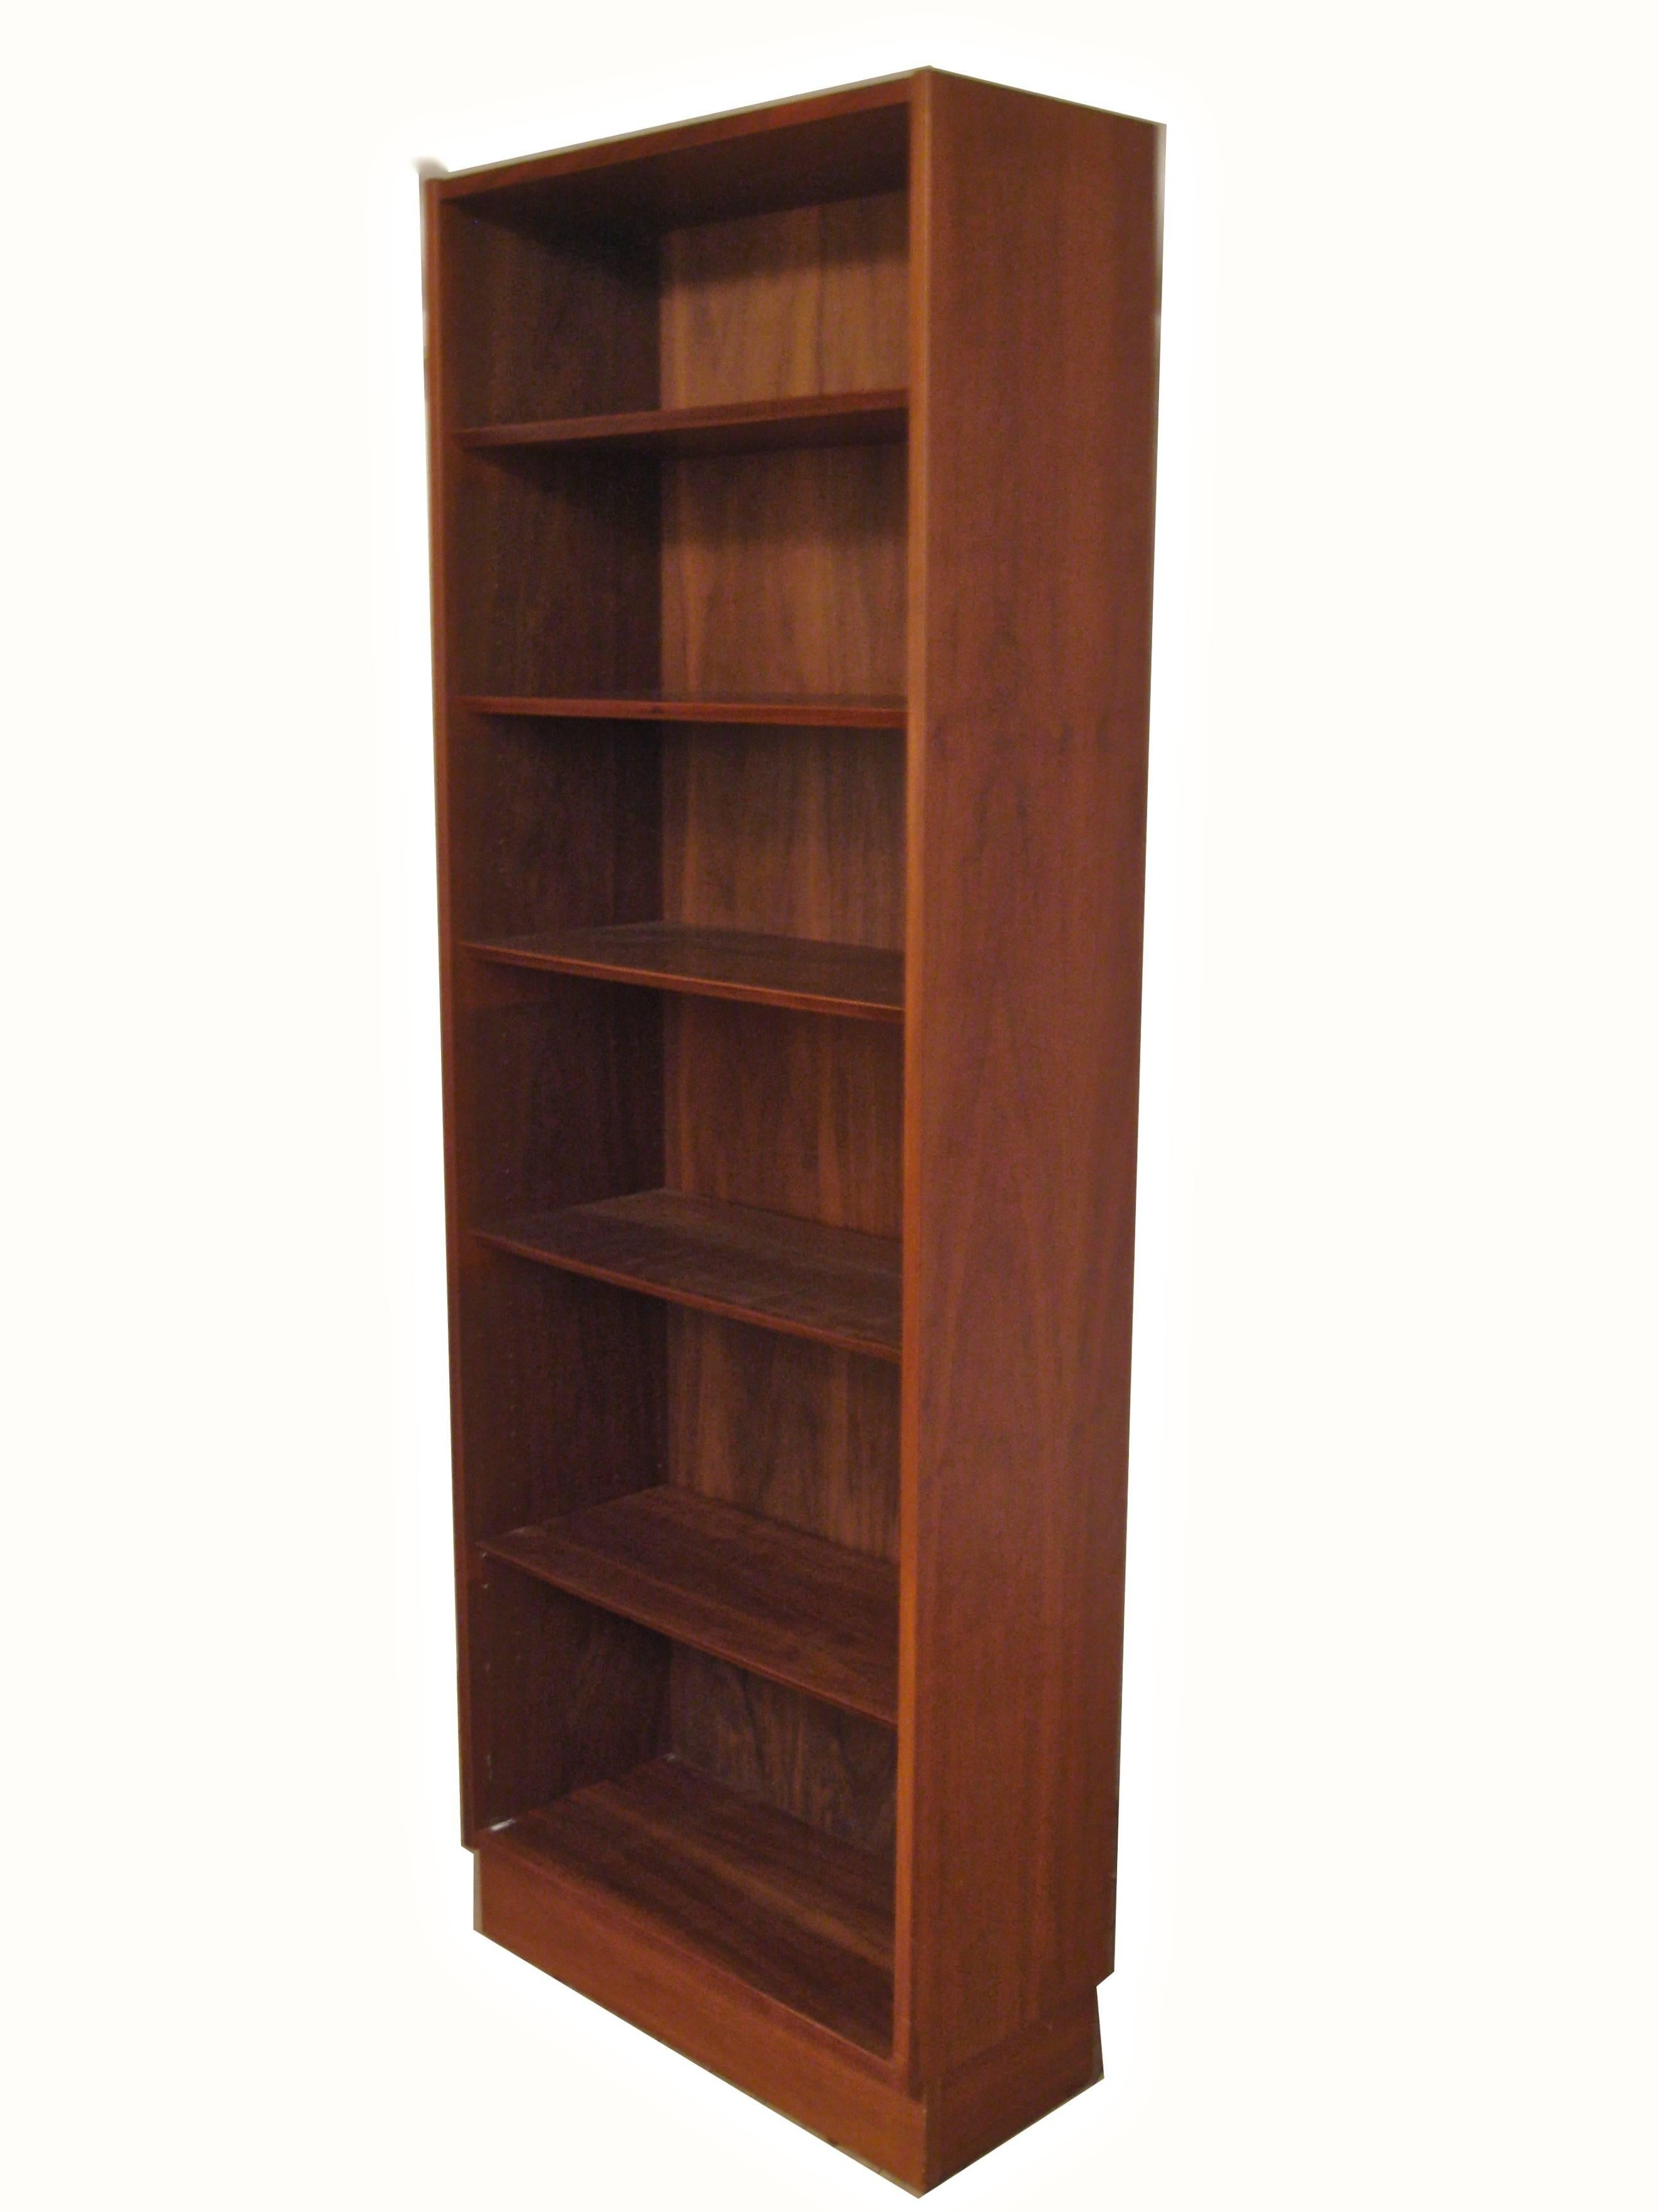 Made of wonderfully figured teak veneers. Solid wood construction. One fixed shelf surrounded by five adjustable shelves. The shelves are adjusted with hidden metal wire pins. One deep shelf for larger books or devices. Unsigned missing Hundevad/